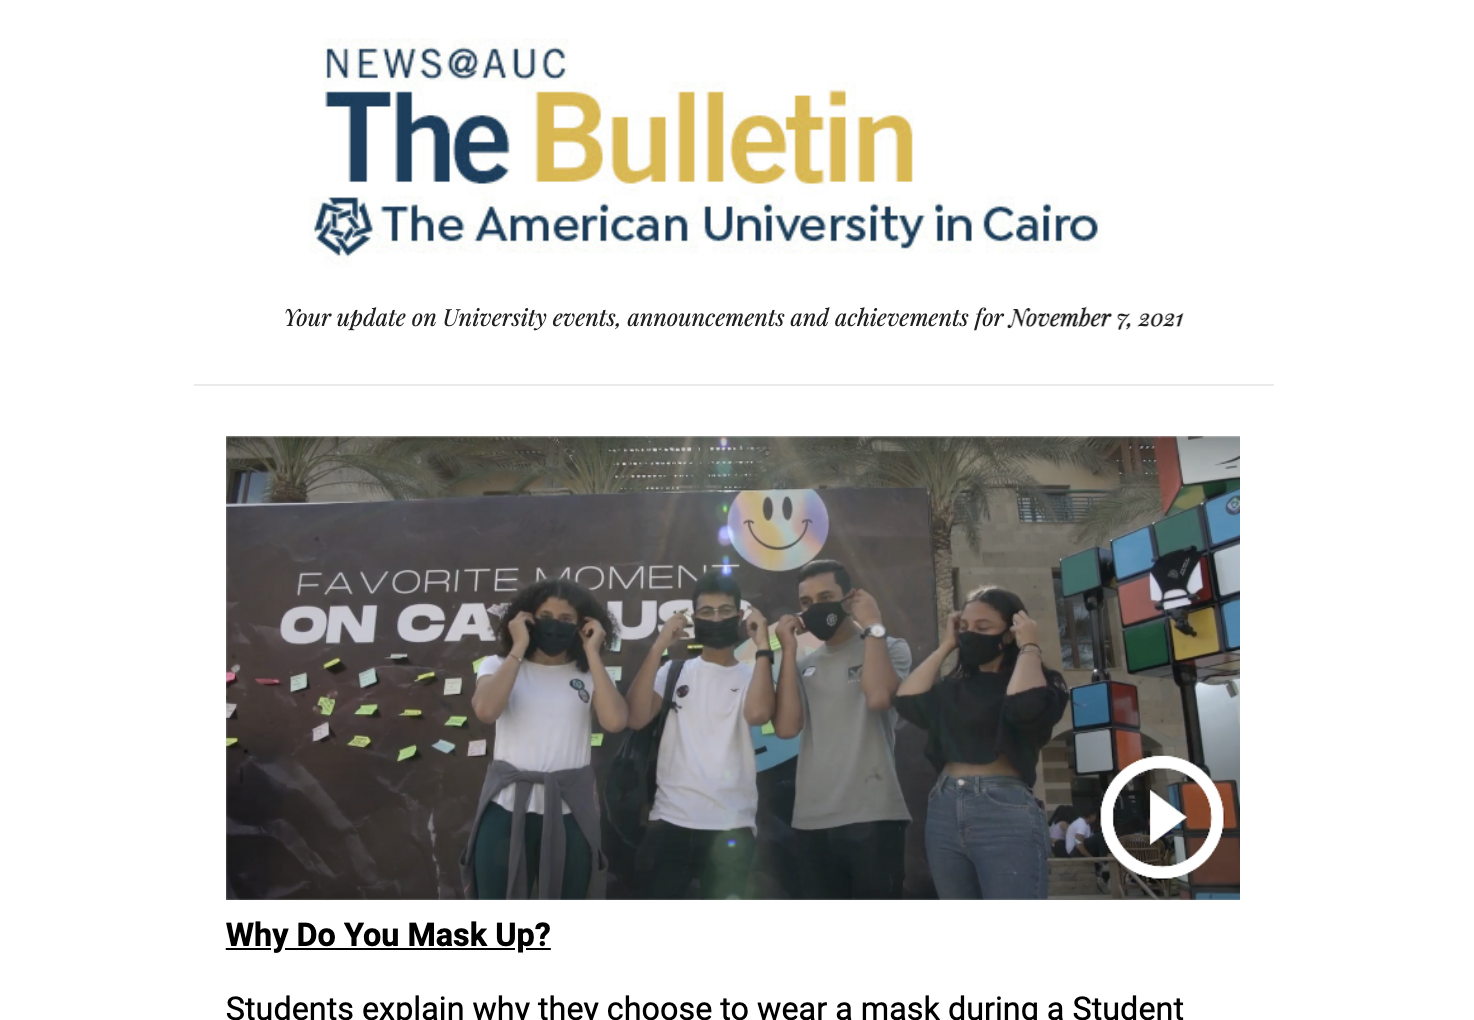 News@AUC Bulletin with photo of masked students